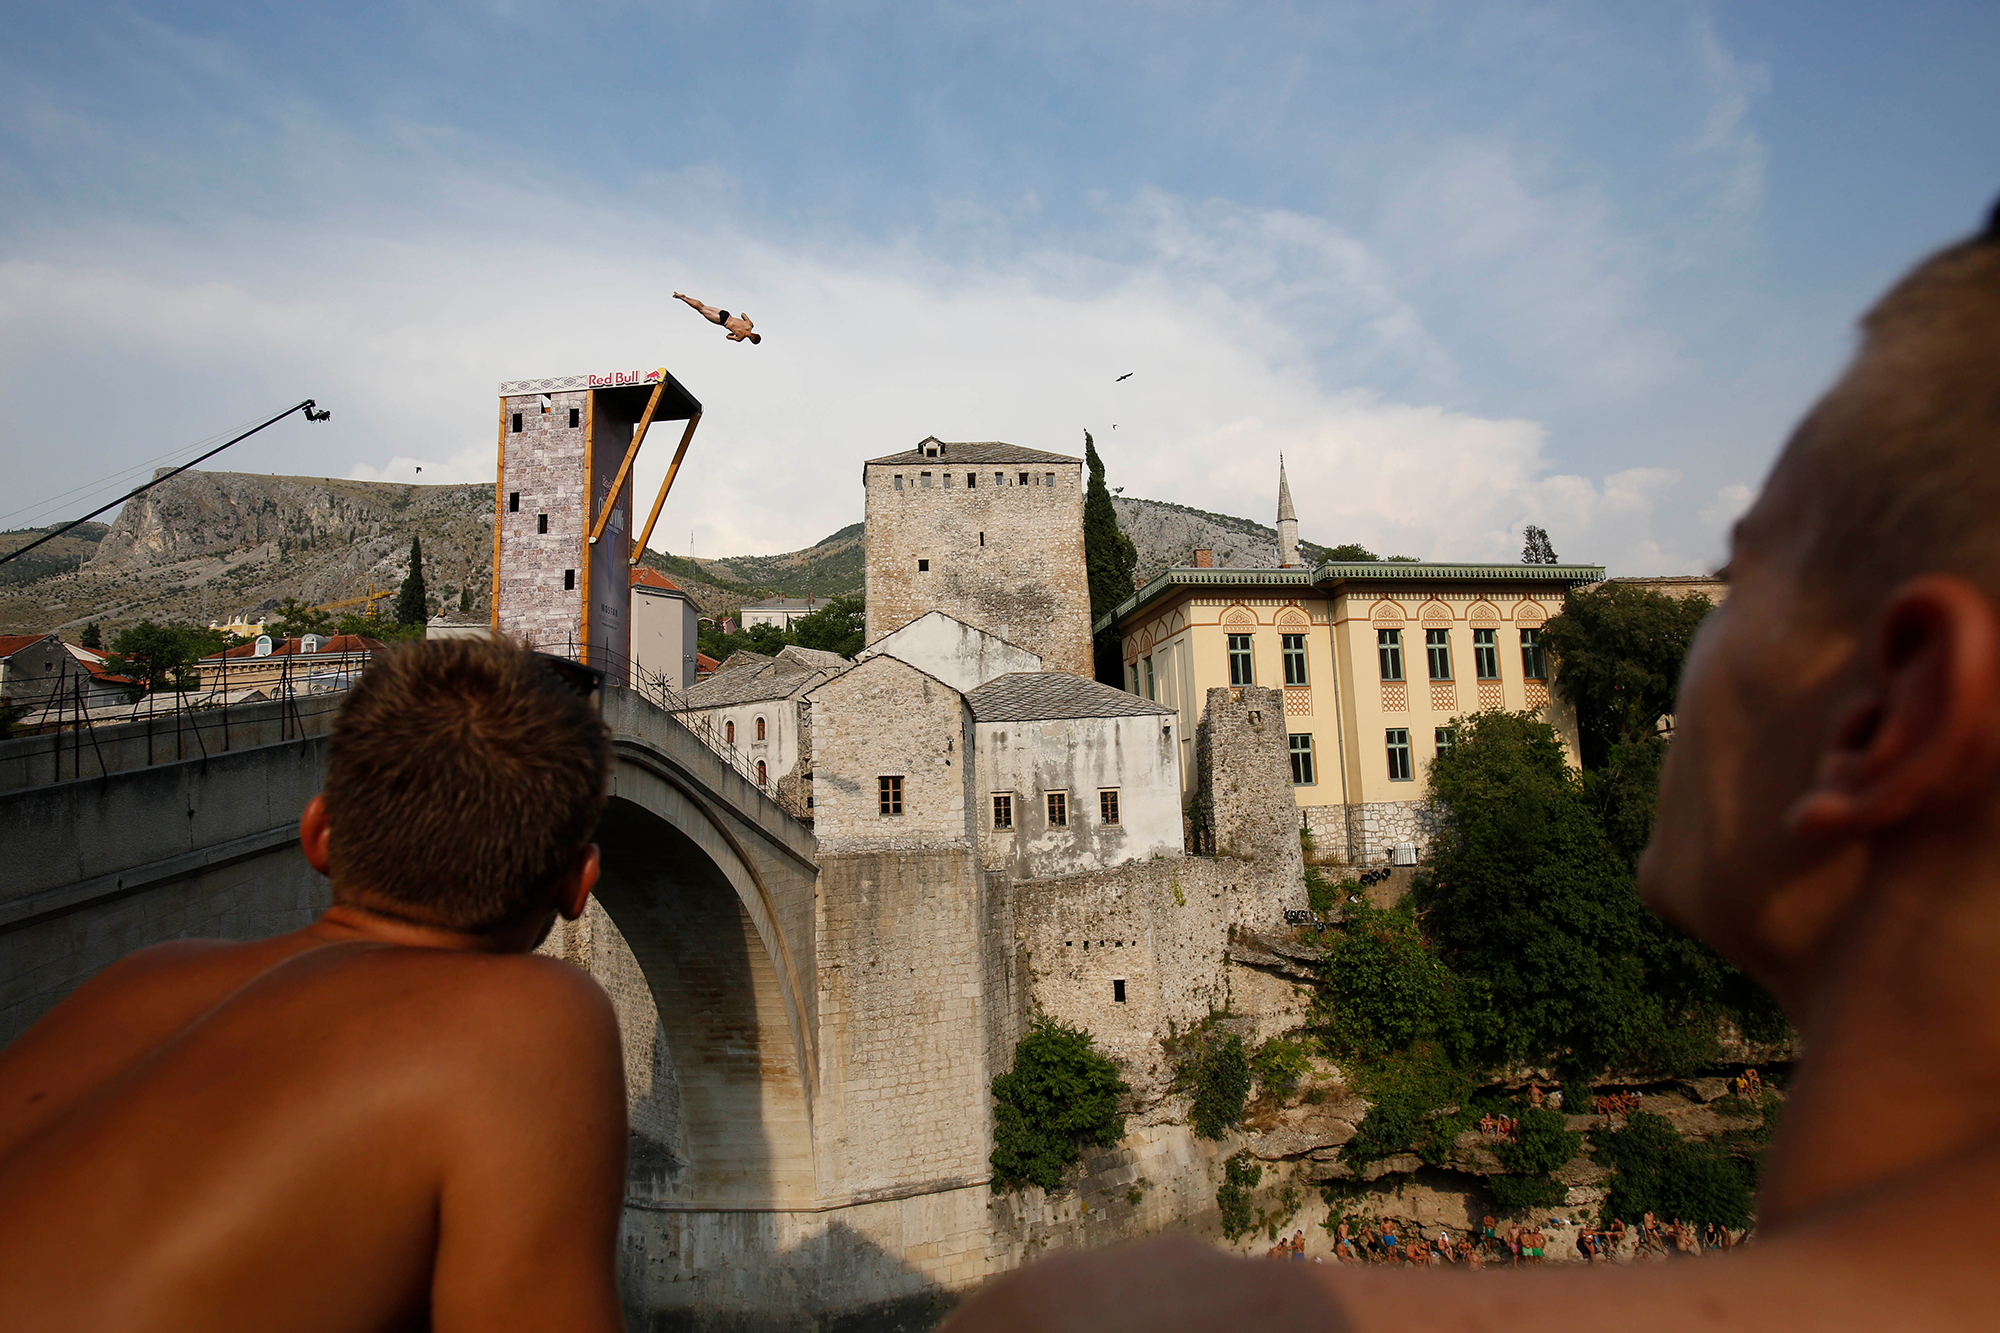 Spectators watch as a diver jumps from the Old Mostar Bridge during the sixth stop of the Red Bull Cliff Diving World Series 2015, in Mostar, 140 kms south of Bosnian capital of Sarajevo, Saturday, Aug. 15, 2015. Fourteen of the world's best competitors took part in the competition diving from a 27 meter high bridge over the river of Neretva. (AP Photo/Amel Emric)